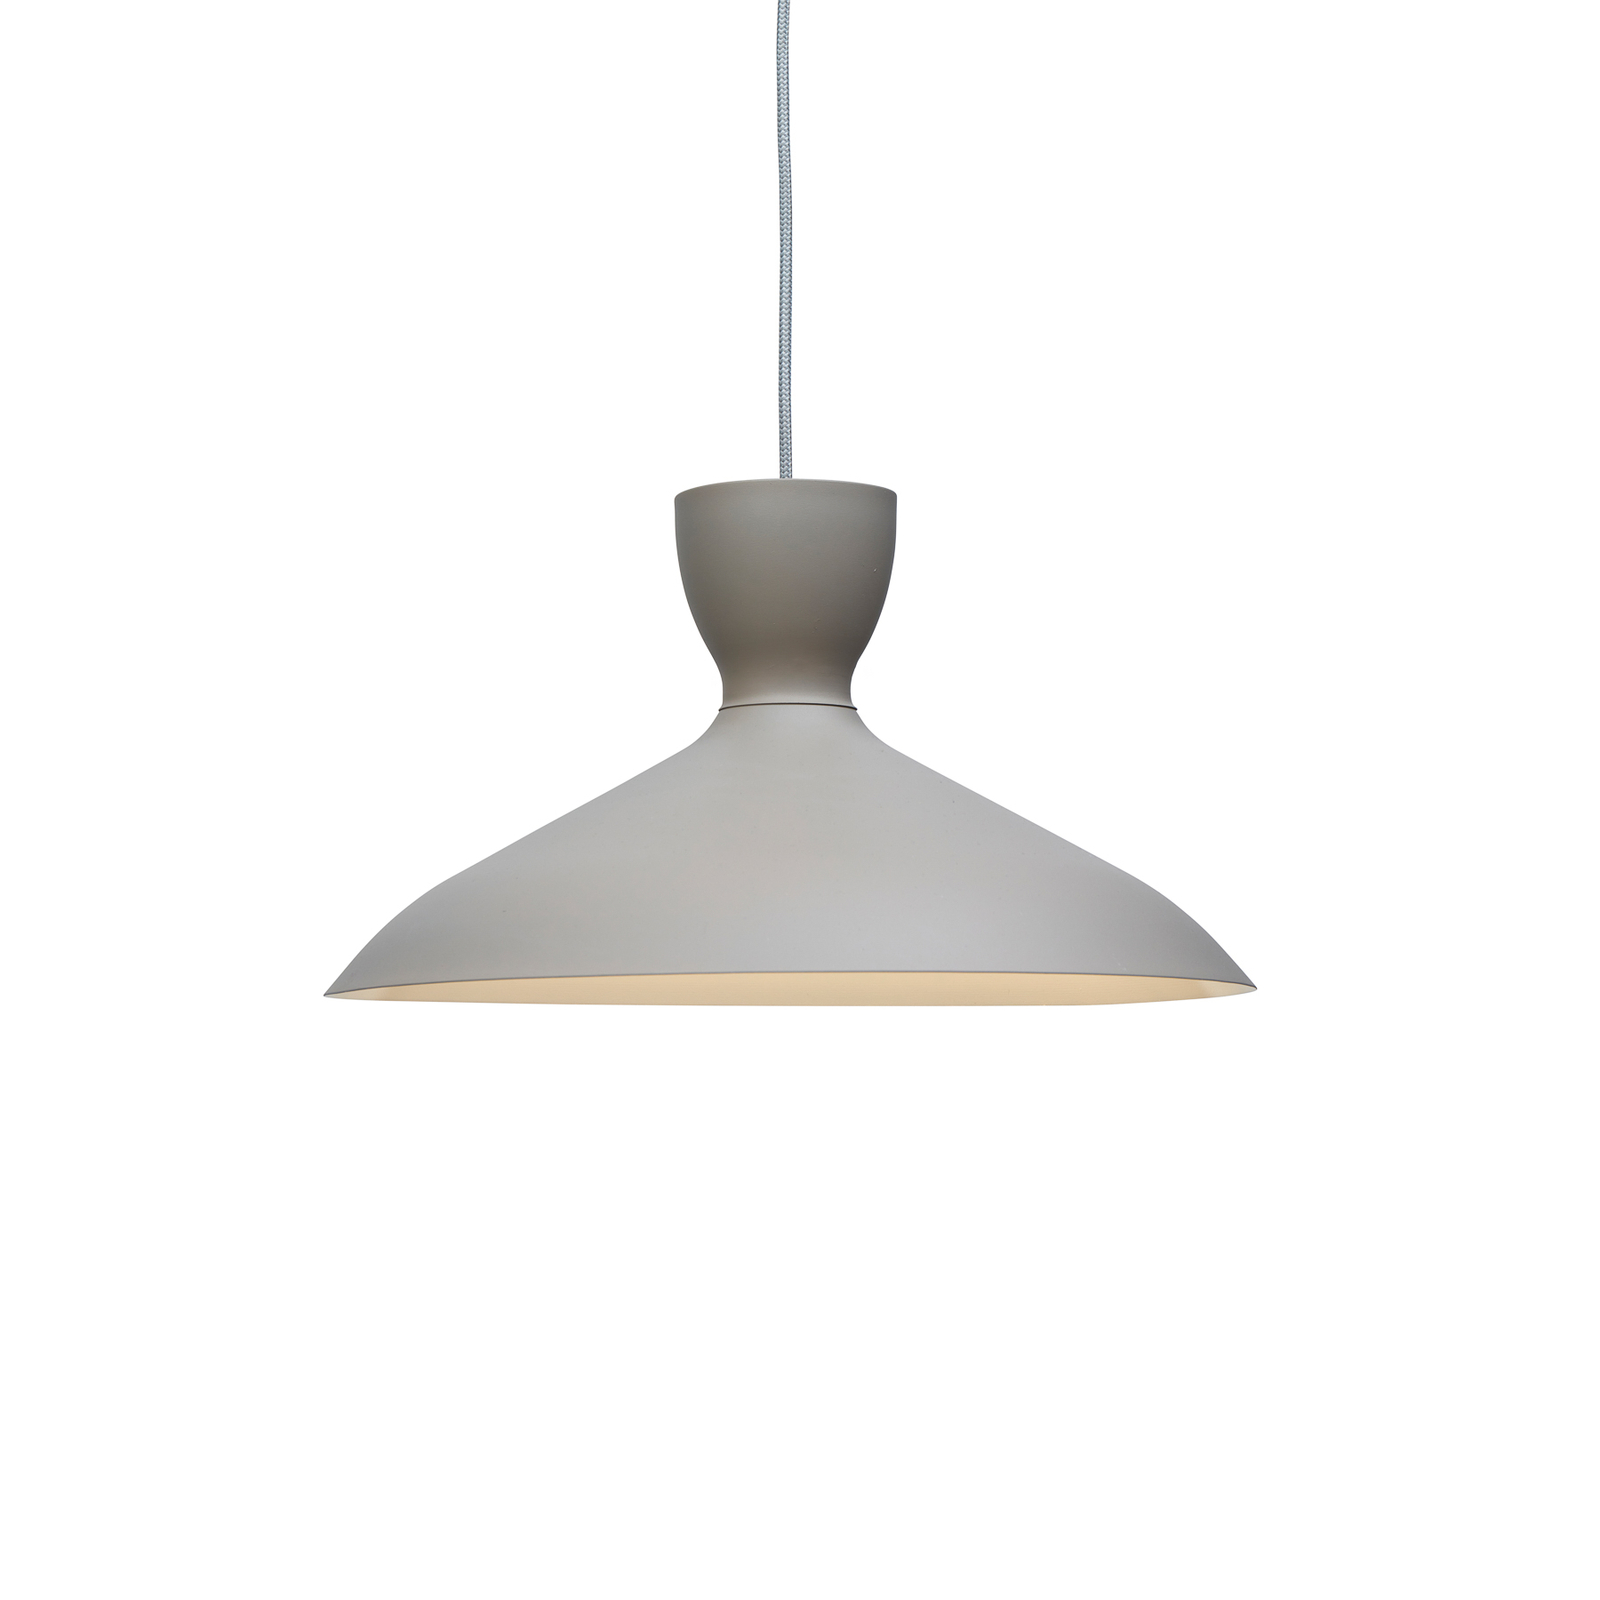 It's about RoMi Suspension Hanover, gris clair